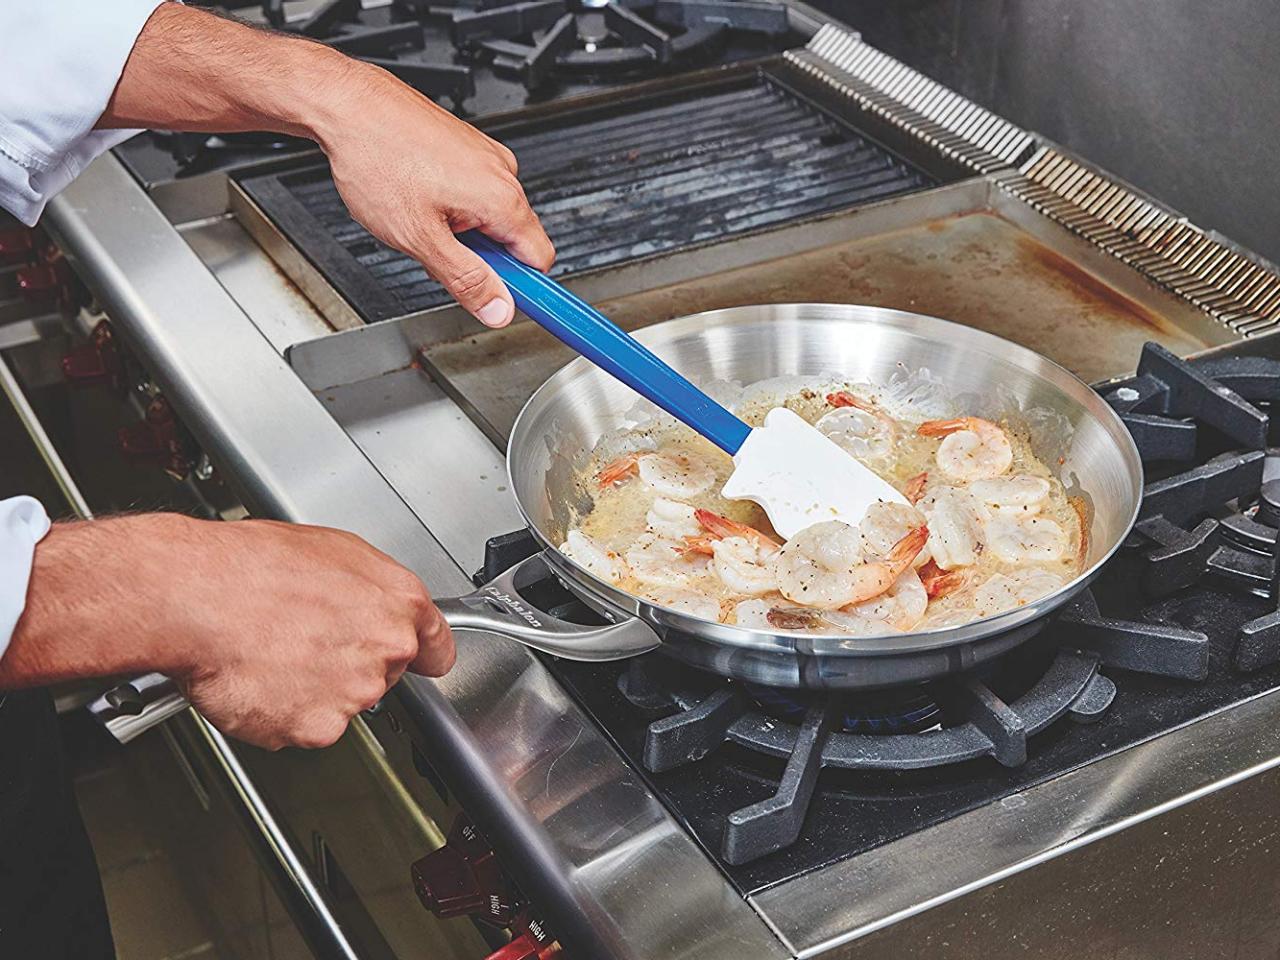 The 7 Best Spatulas for Eggs, According to Reviews